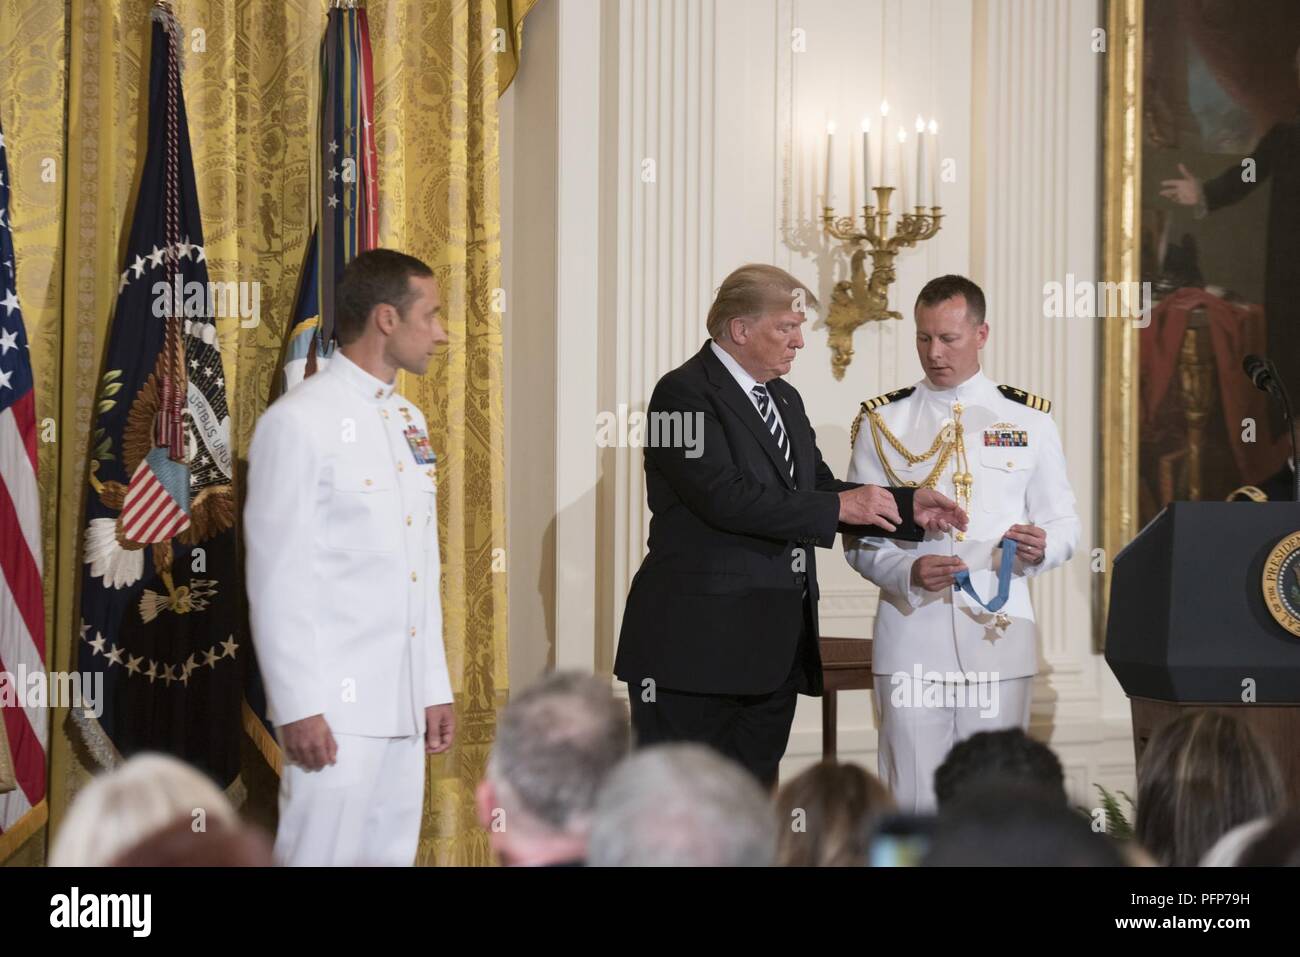 (May 24, 2018) President Donald J. Trump presents the Medal of Honor to retired Master Chief Special Warfare Operator (SEAL) Britt Slabinski during a ceremony at the White House in Washington, D.C. Slabinski received the Medal of Honor for his actions during Operation Anaconda in Afghanistan in March 2002. Stock Photo